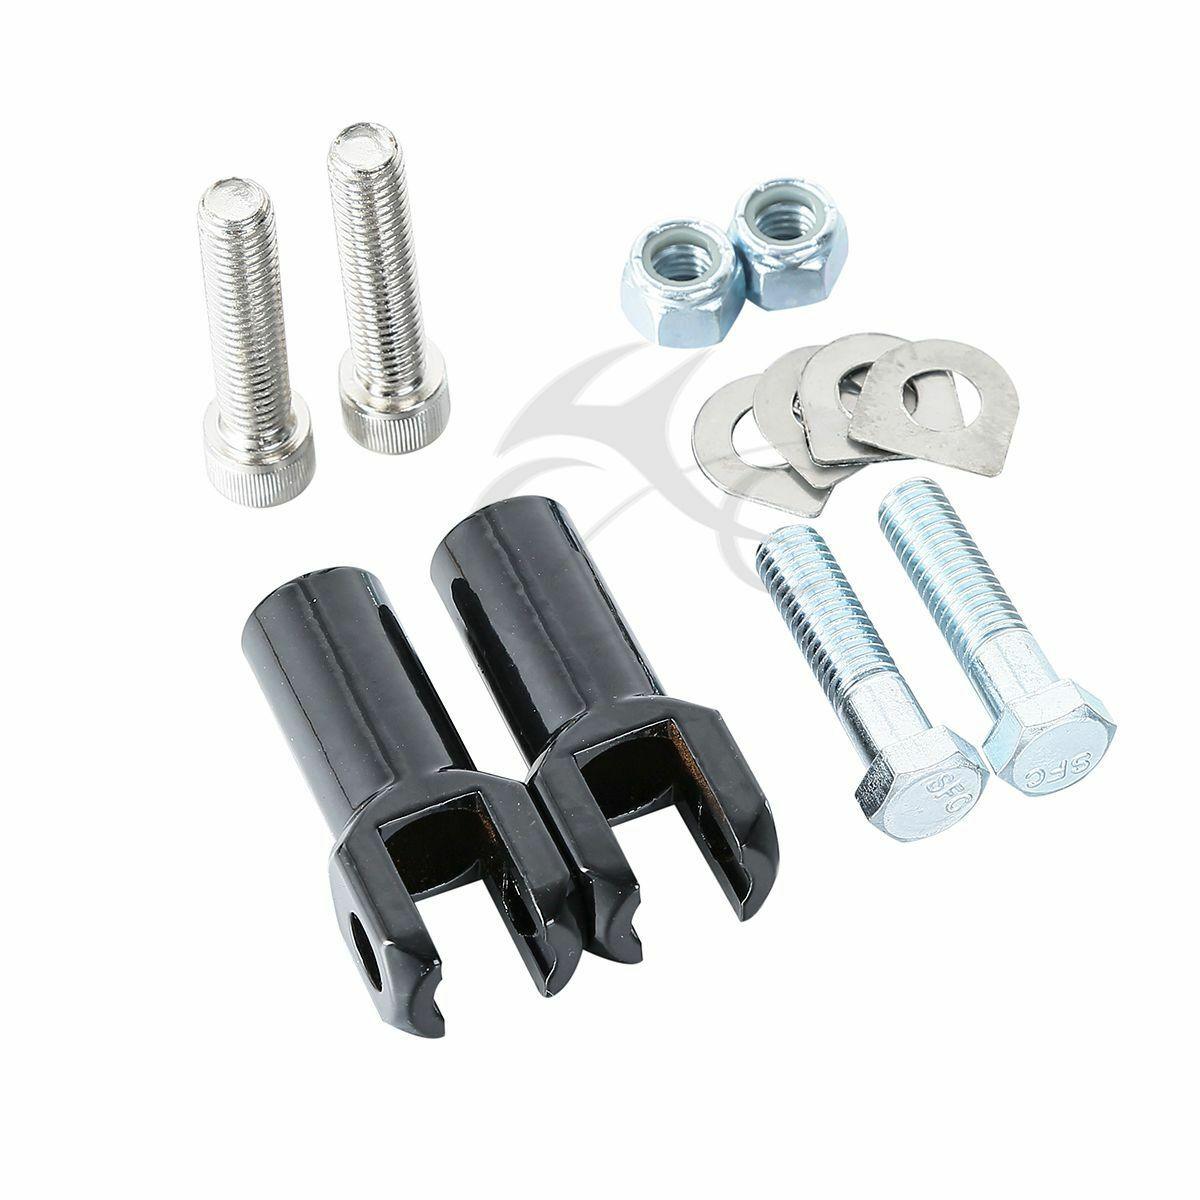 Rear Passenger Foot Peg Support Clevis Mount Fit For Harley Softail Fatboy 00-06 - Moto Life Products